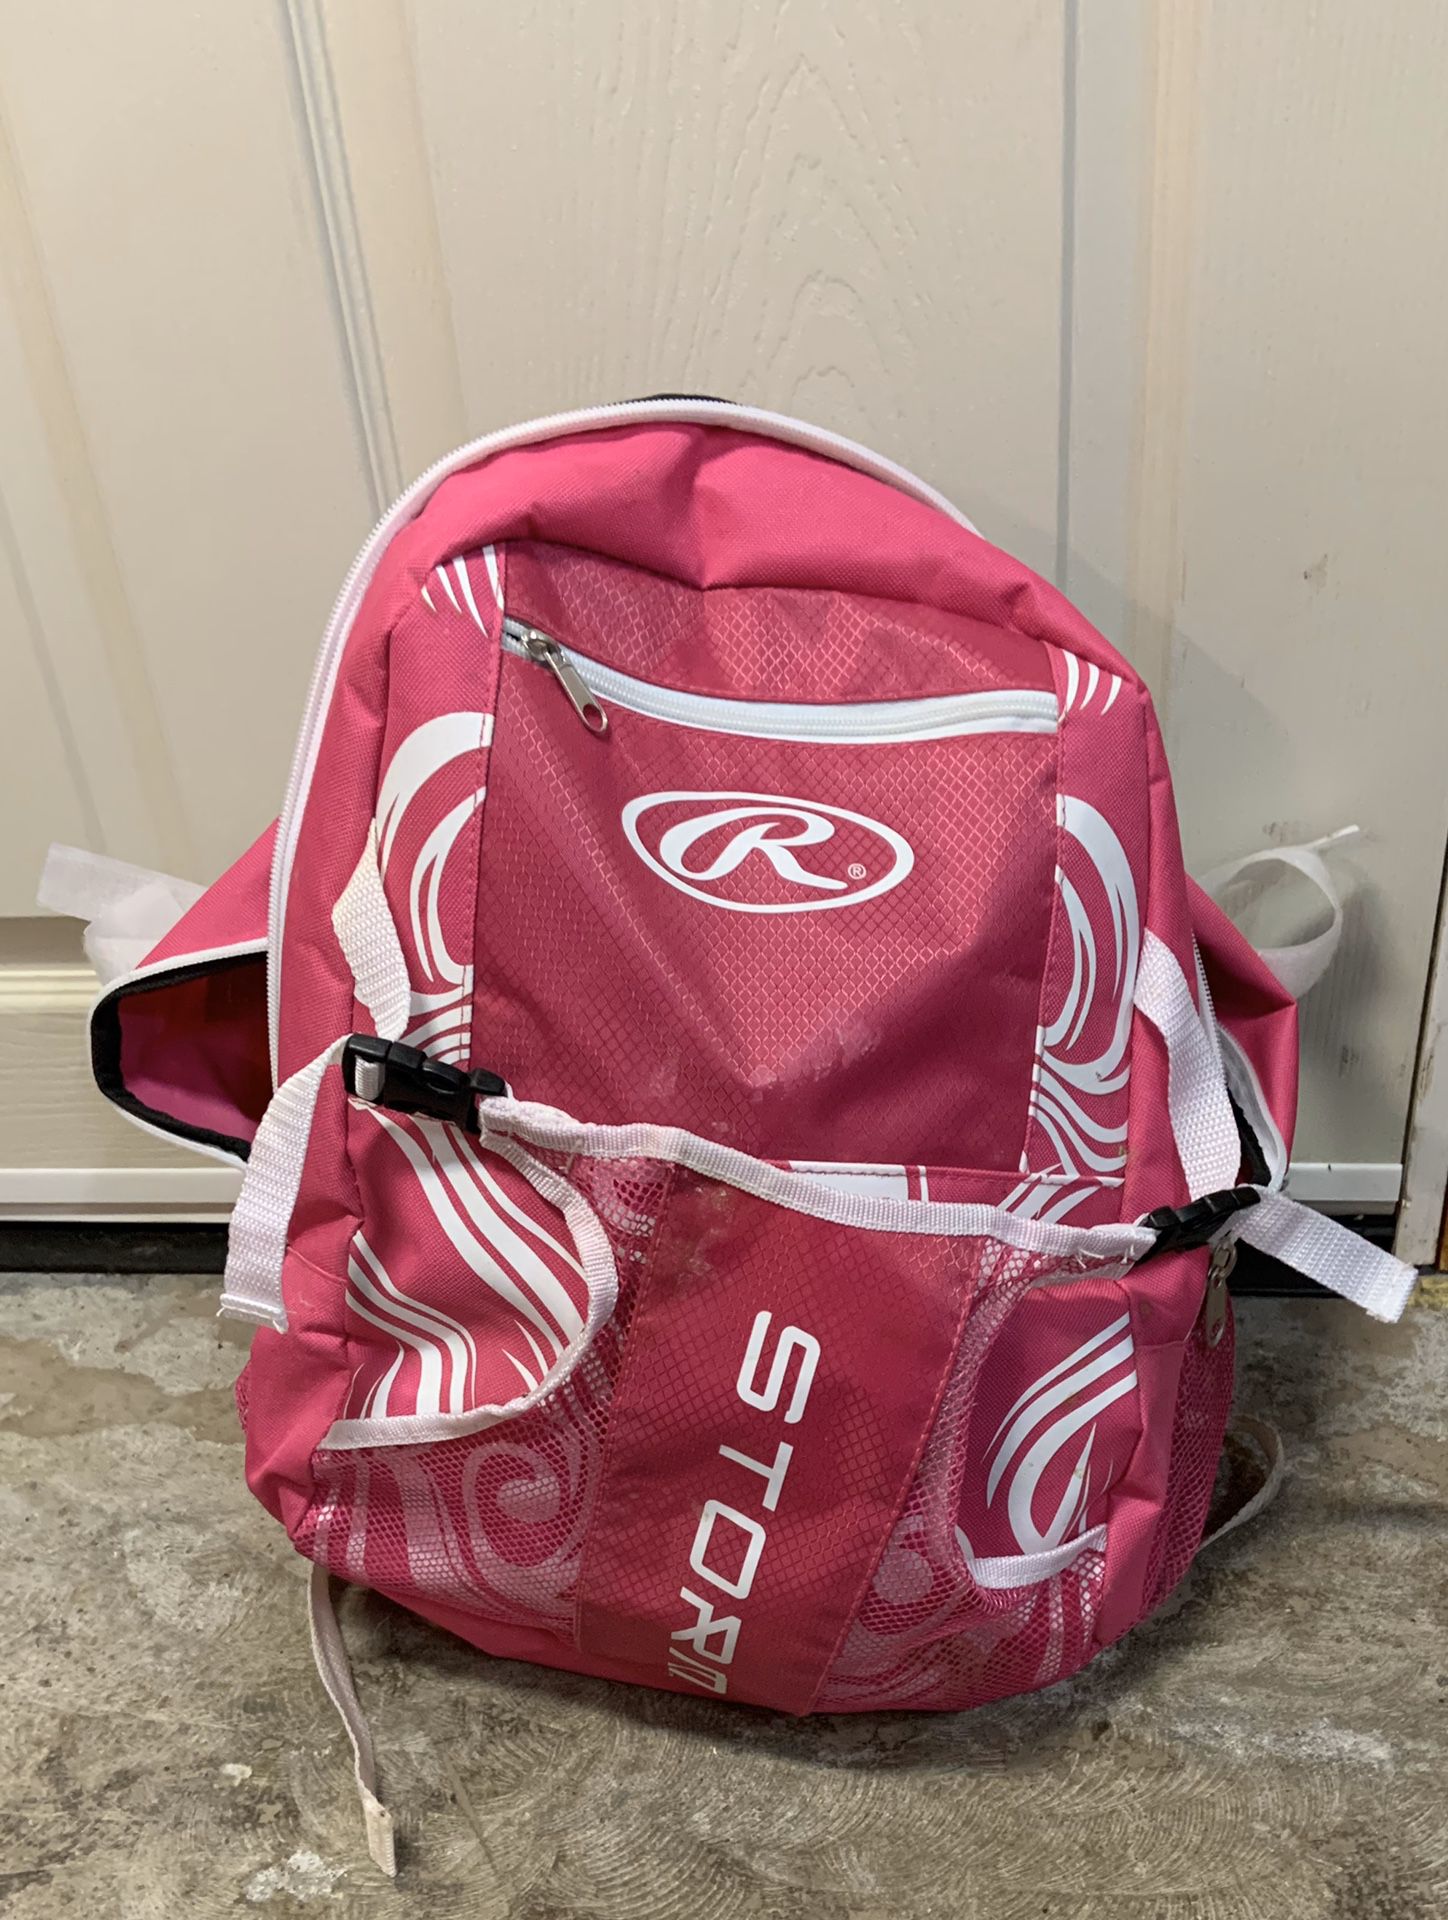 Rawlings brand softball pink softball bag with helmet and fitted glove